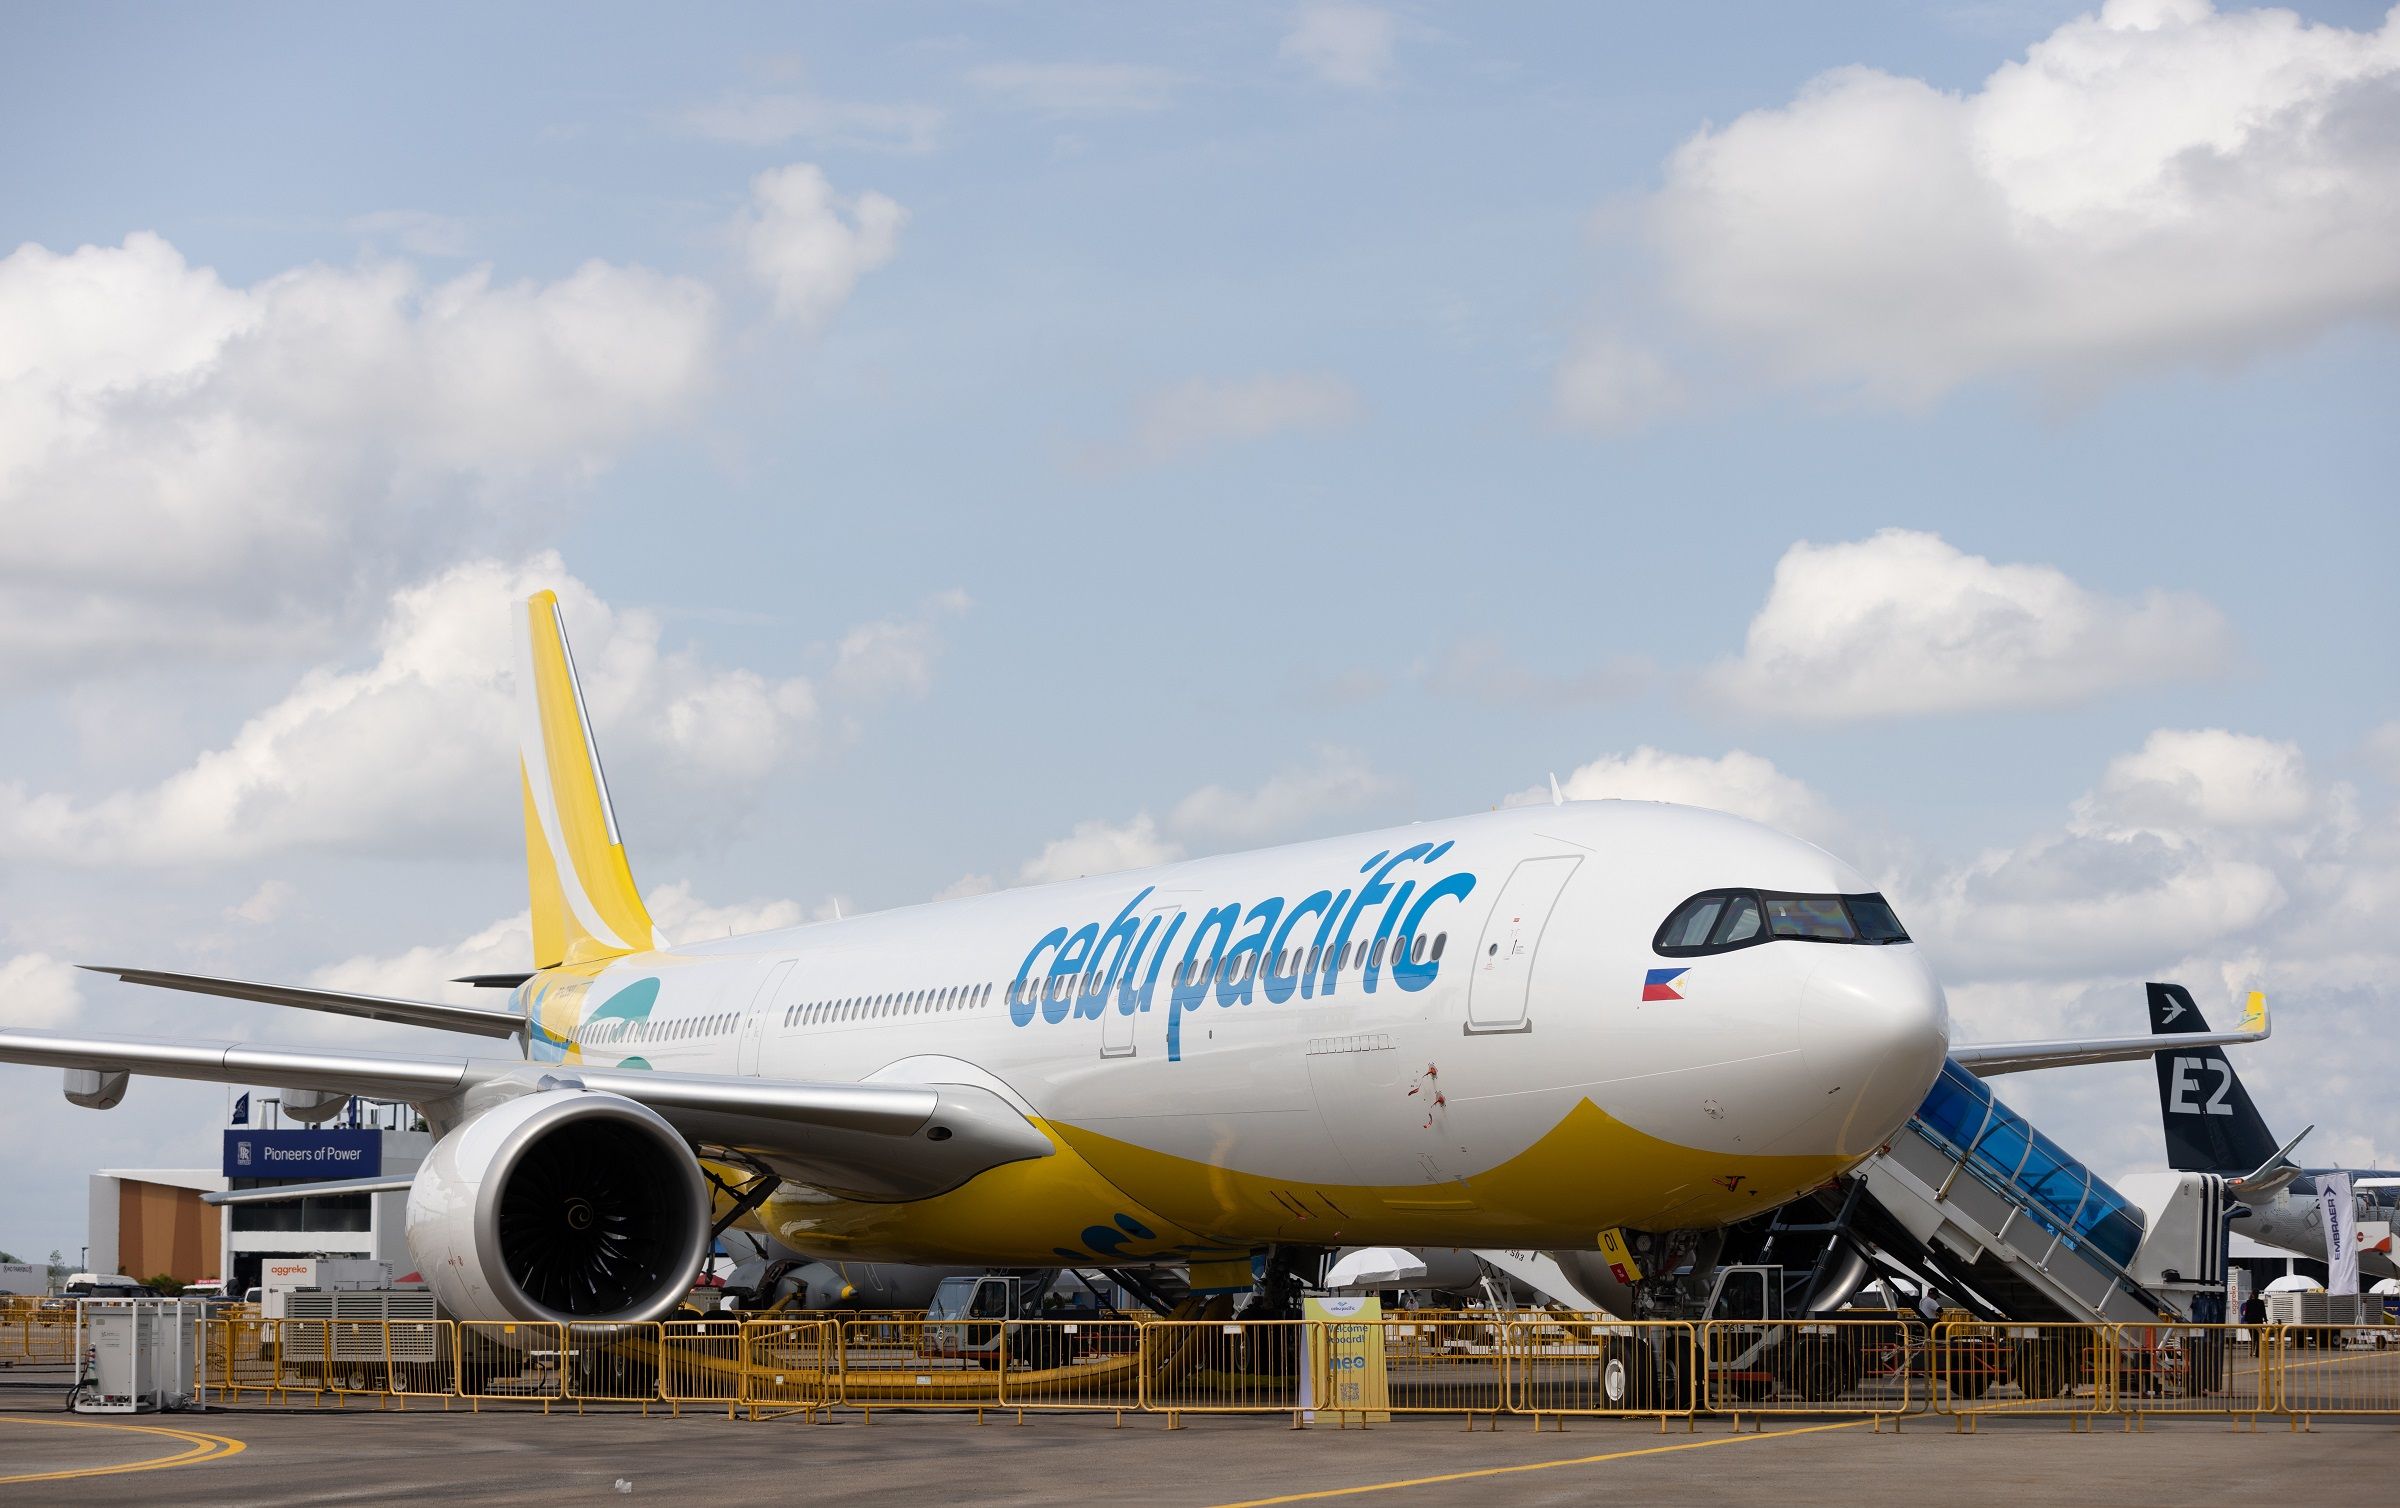 Singapore Airshow 2022 - A330-900 Cebu Pacific on static